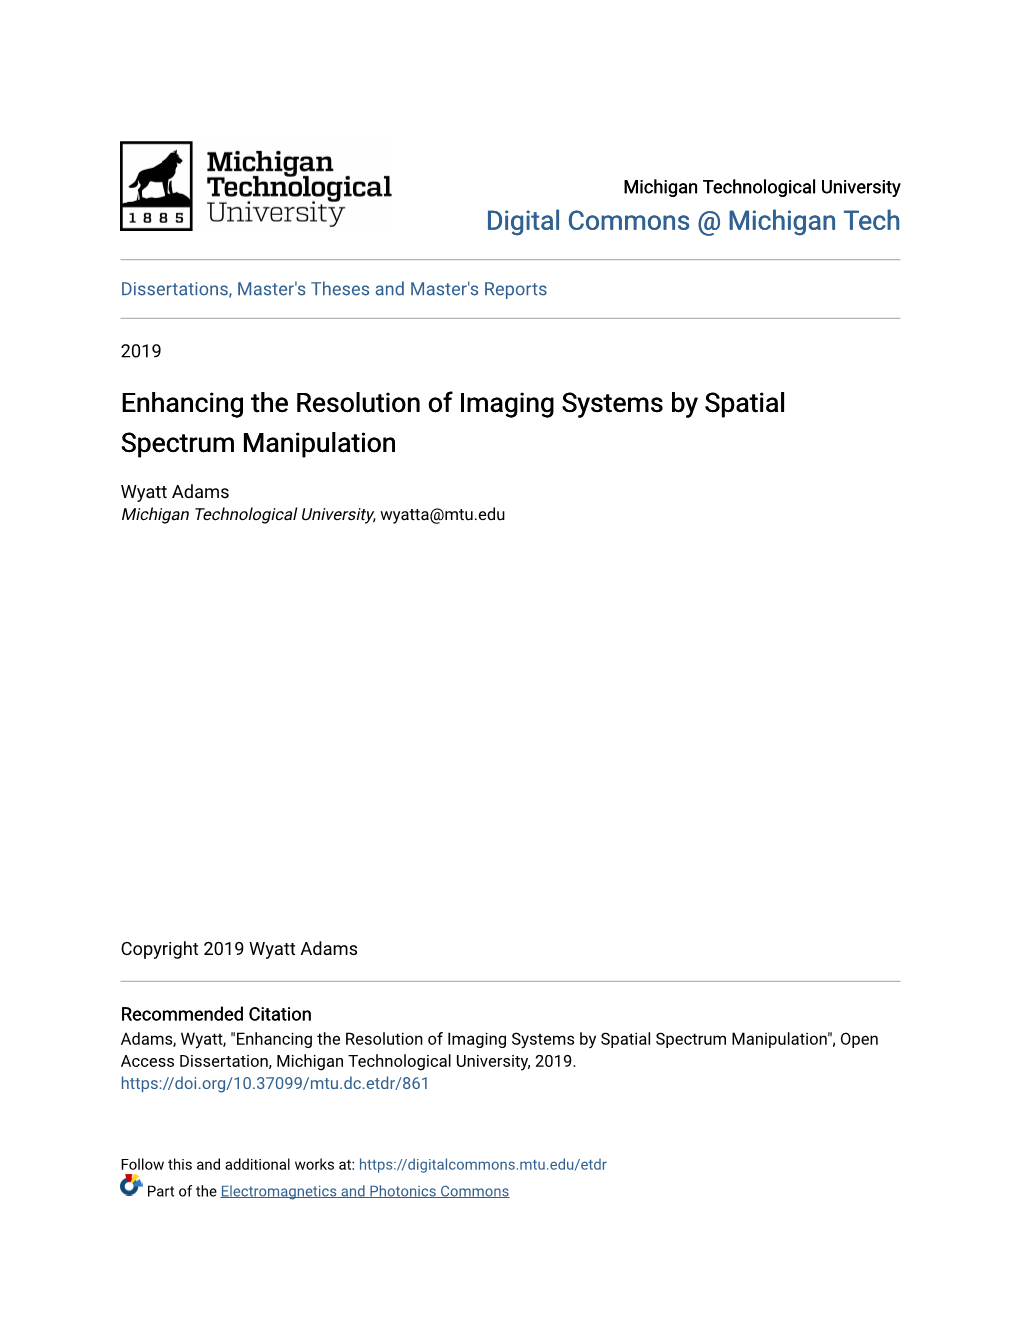 Enhancing the Resolution of Imaging Systems by Spatial Spectrum Manipulation